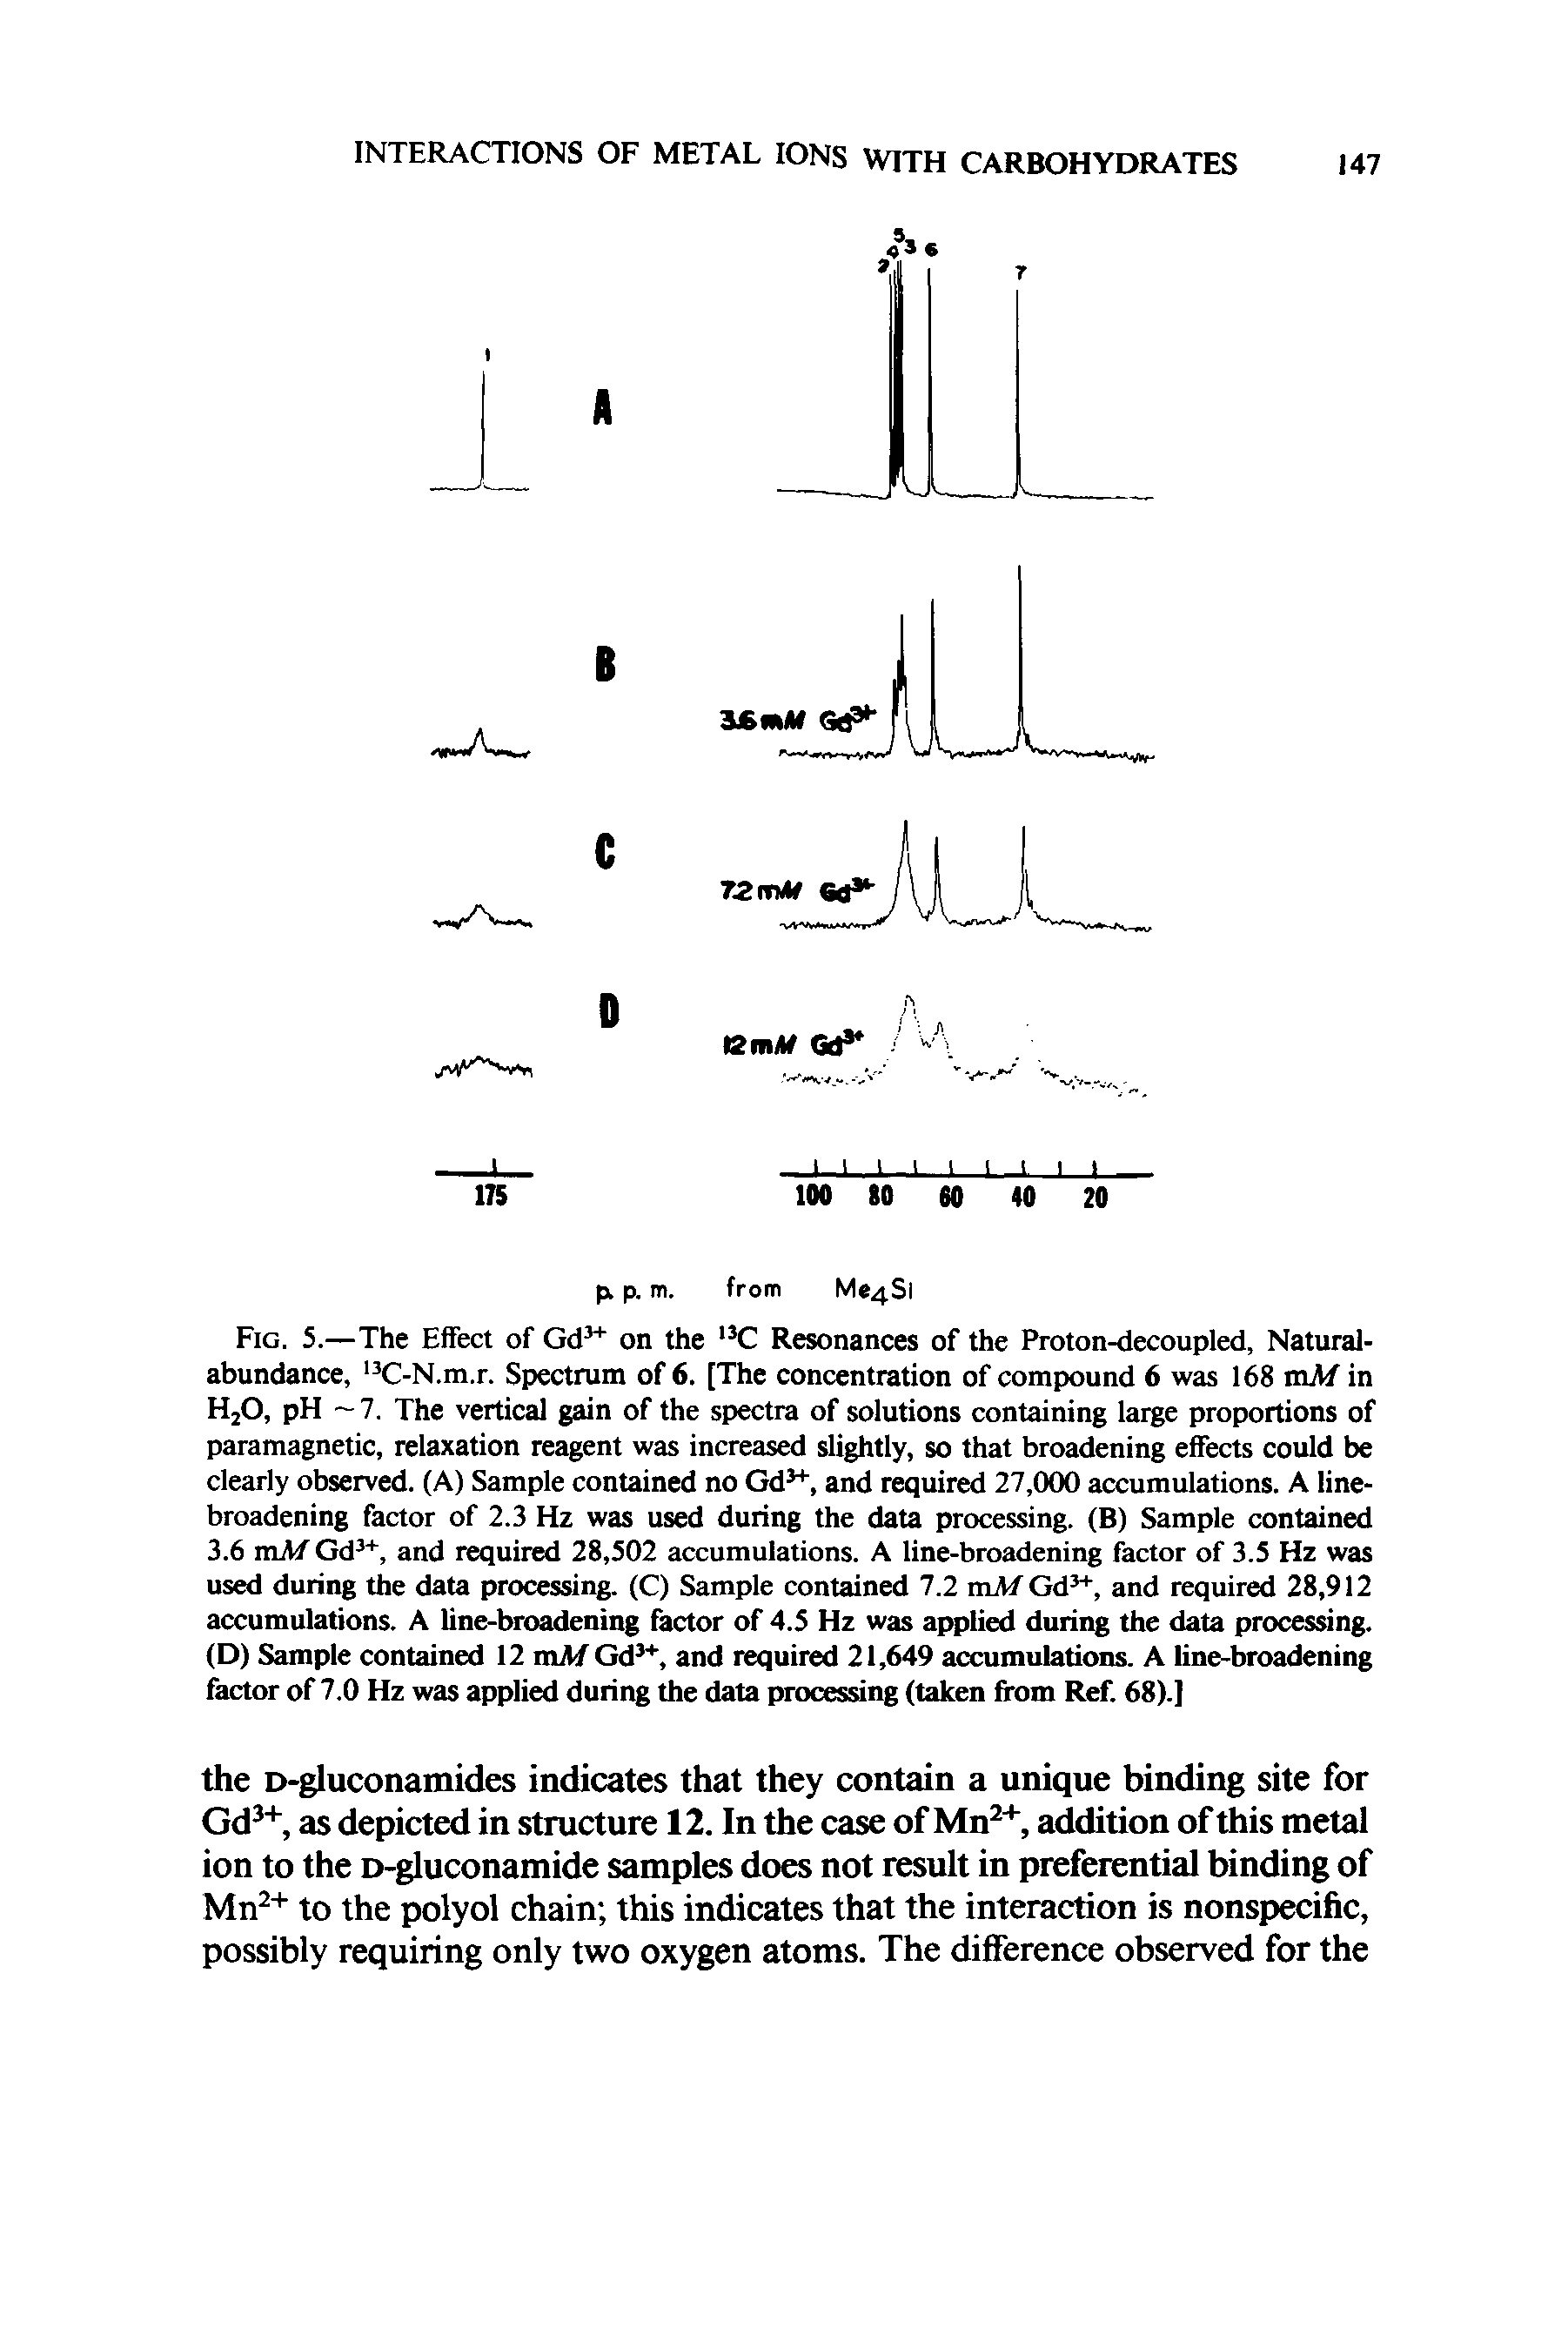 Fig. 5.—The Effect of Gd + on the C Resonances of the Proton-decoupled, Natural-abundance, K -N.m.r. Spectrum of 6. [The concentration of compound 6 was 168 toM in HjO, pH 7. The vertical gam of the spectra of solutions containing large proportions of paramagnetic, relaxation reagent was increased slightly, so that broadening effects could be clearly observed. (A) Sample contained no Gd , and requited 27,000 accumulations. A linebroadening factor of 2.3 Hz was used during the data processing. (B) Sample contained...